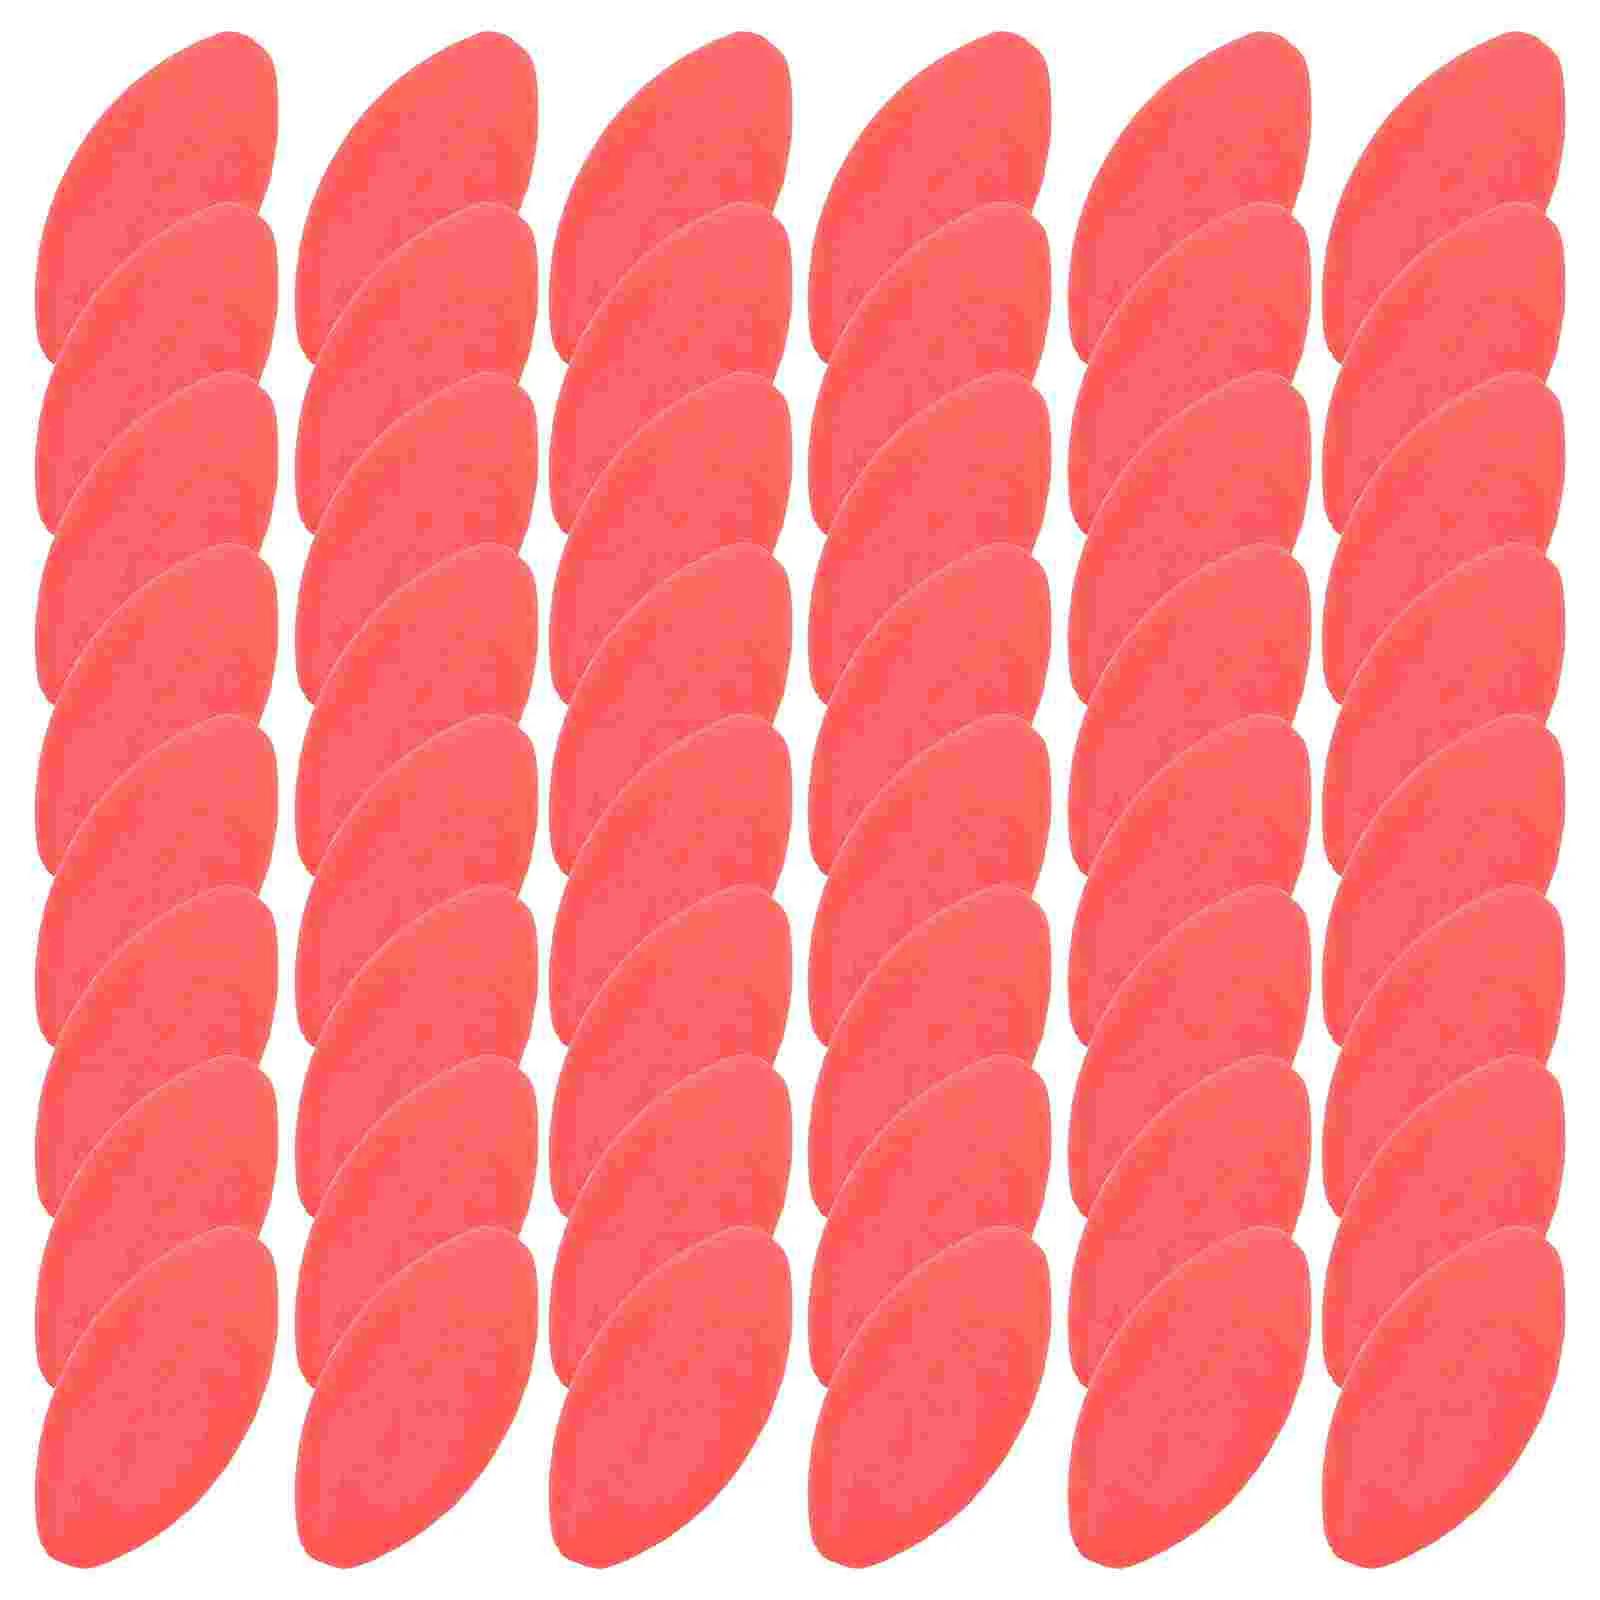 

200 Pcs Tools Fishing Tackles Eye-catching Beans Wait Fly Equipment Plastic Bobbers Floats Surf Accessories